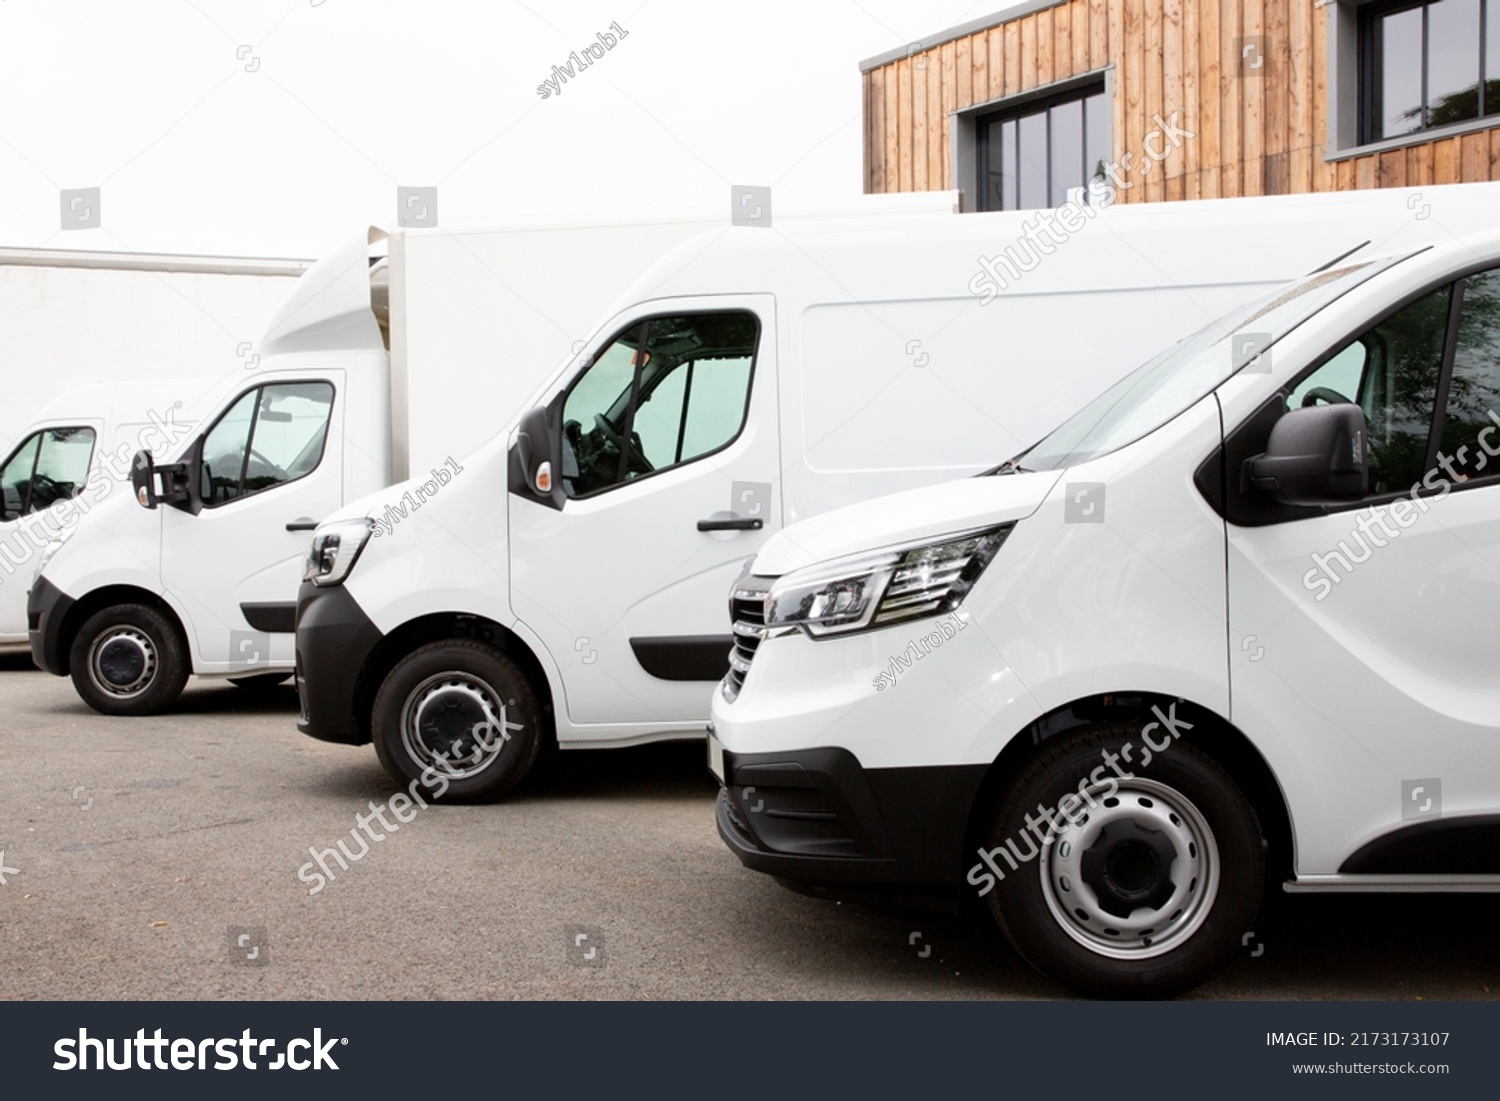 Several cars vans trucks parked in parking lot for rent delivery white vans in service van truck front of entrance of warehouse distribution logistic society #2173173107